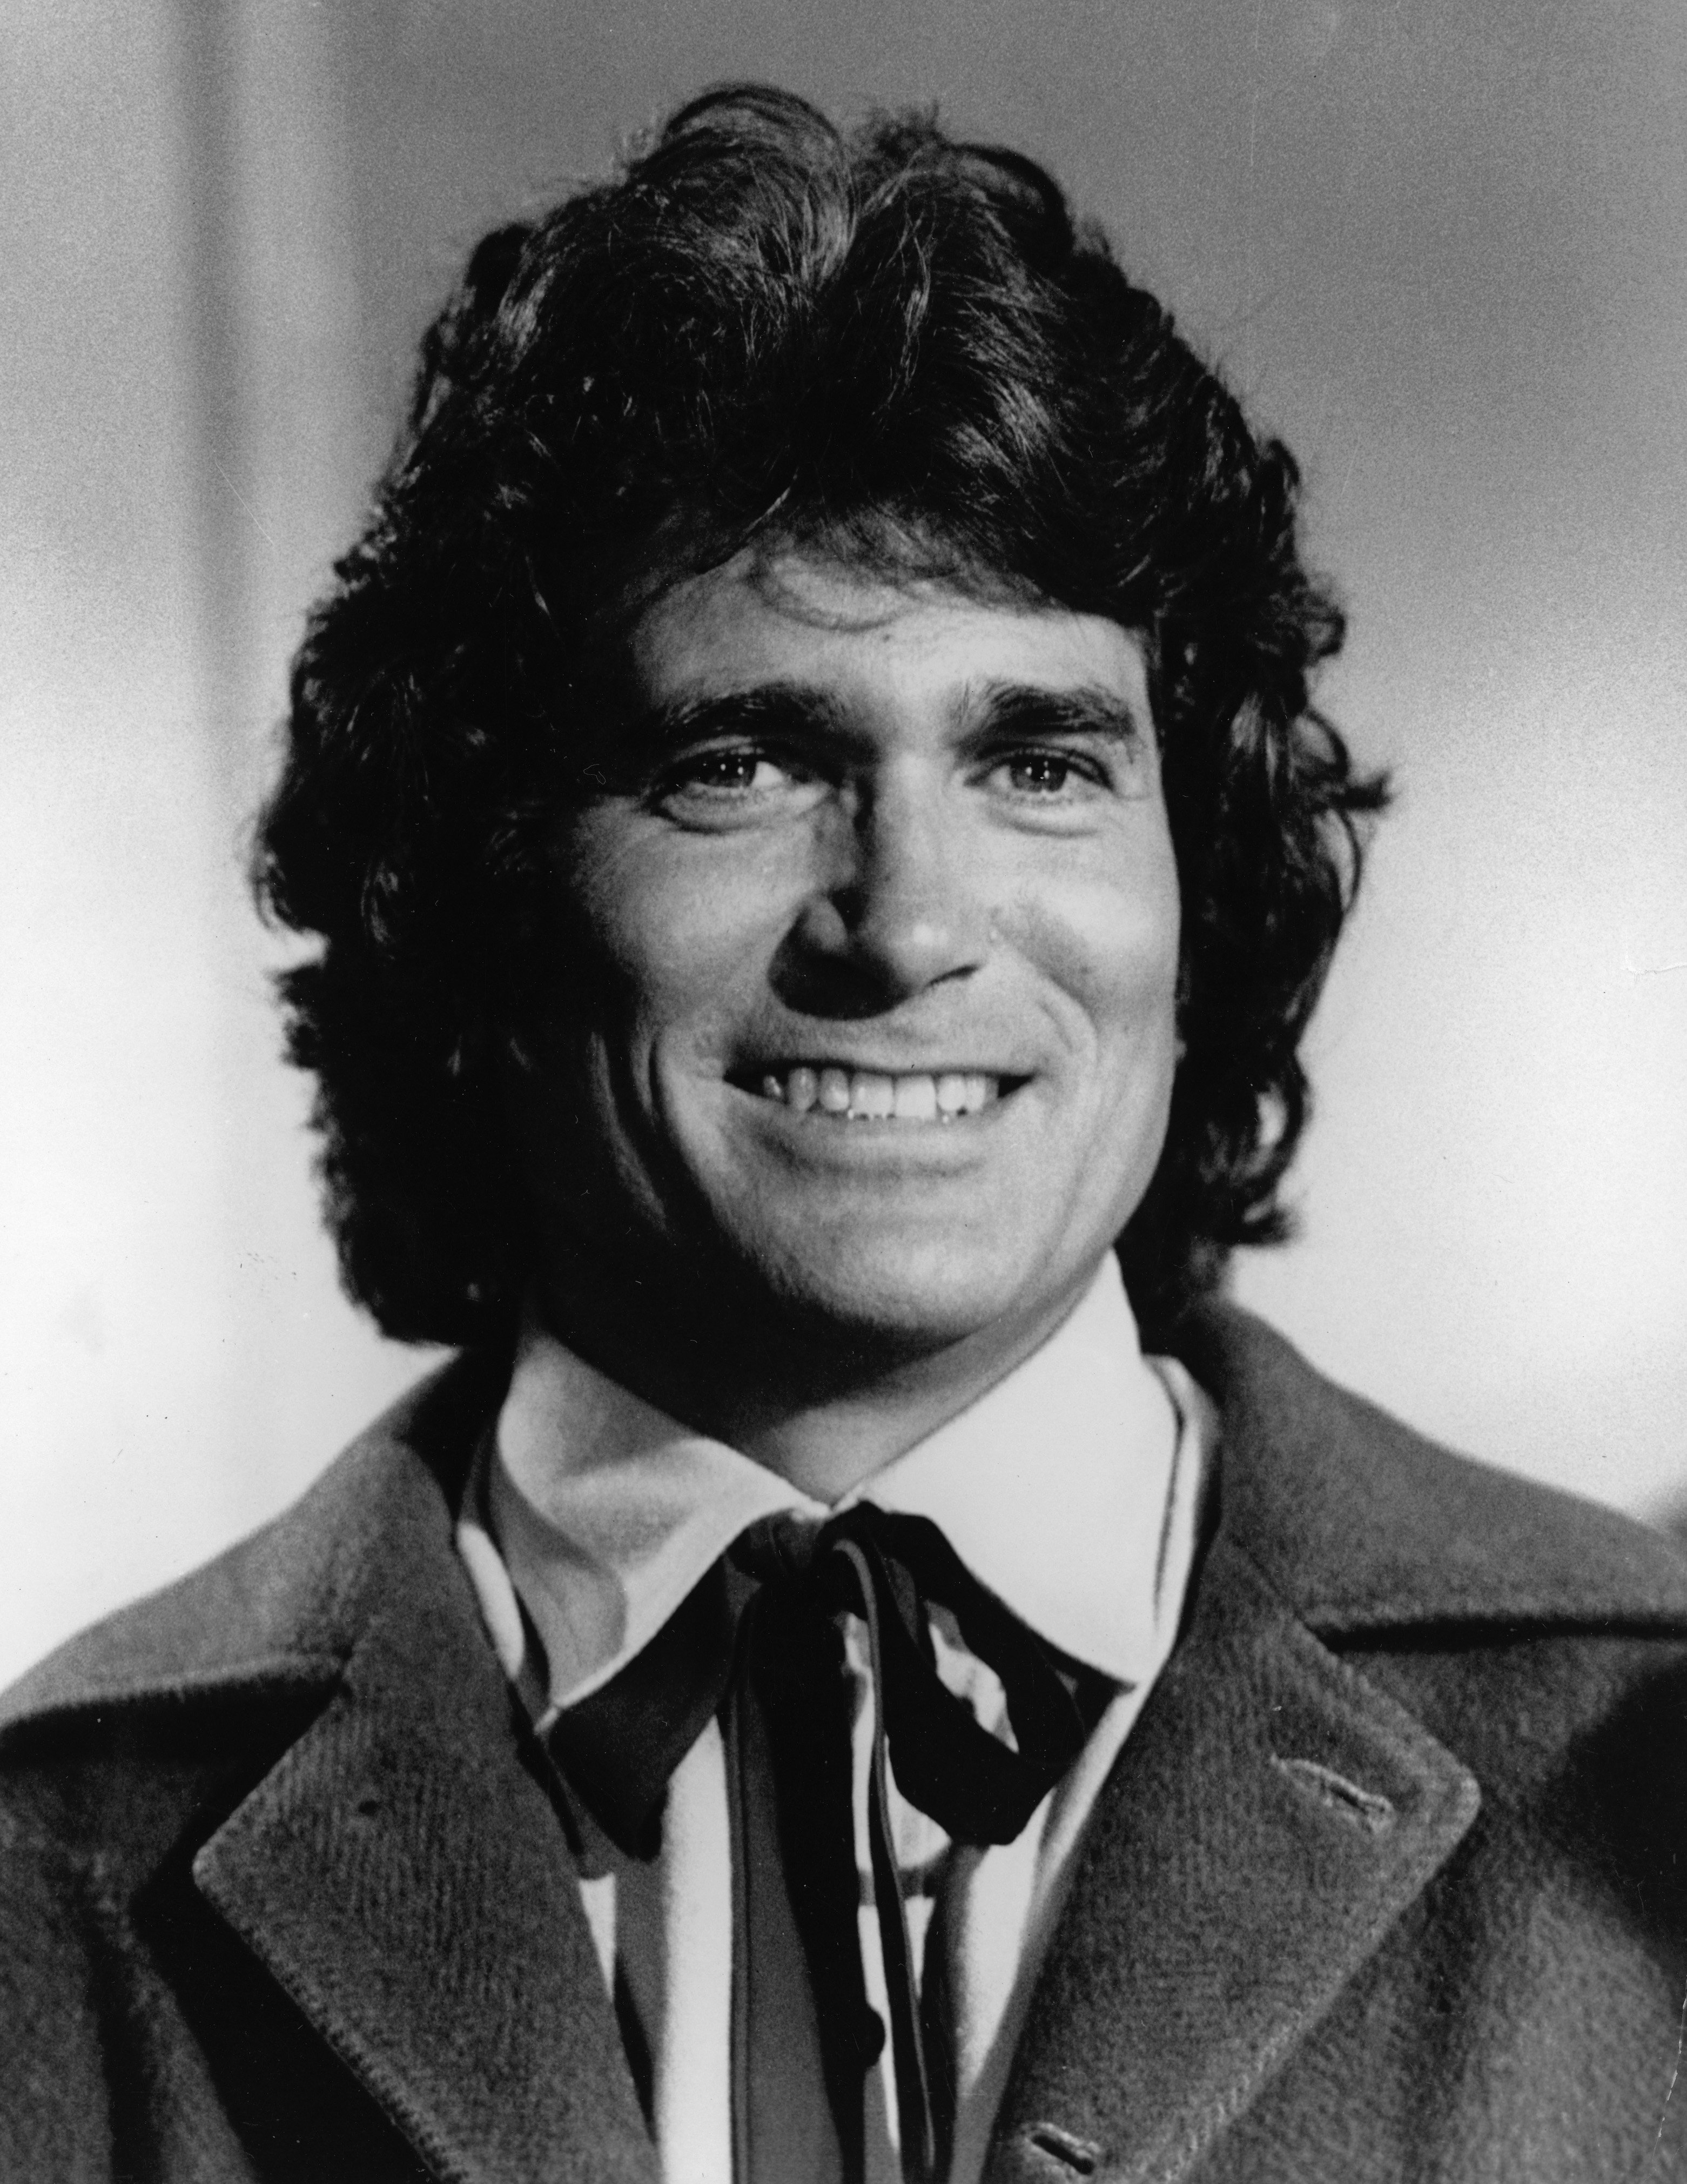 Headshot of American actor Michael Landon (1936 - 1991) from the television series, 'The Little House On The Prairie' | Photo: GettyImages